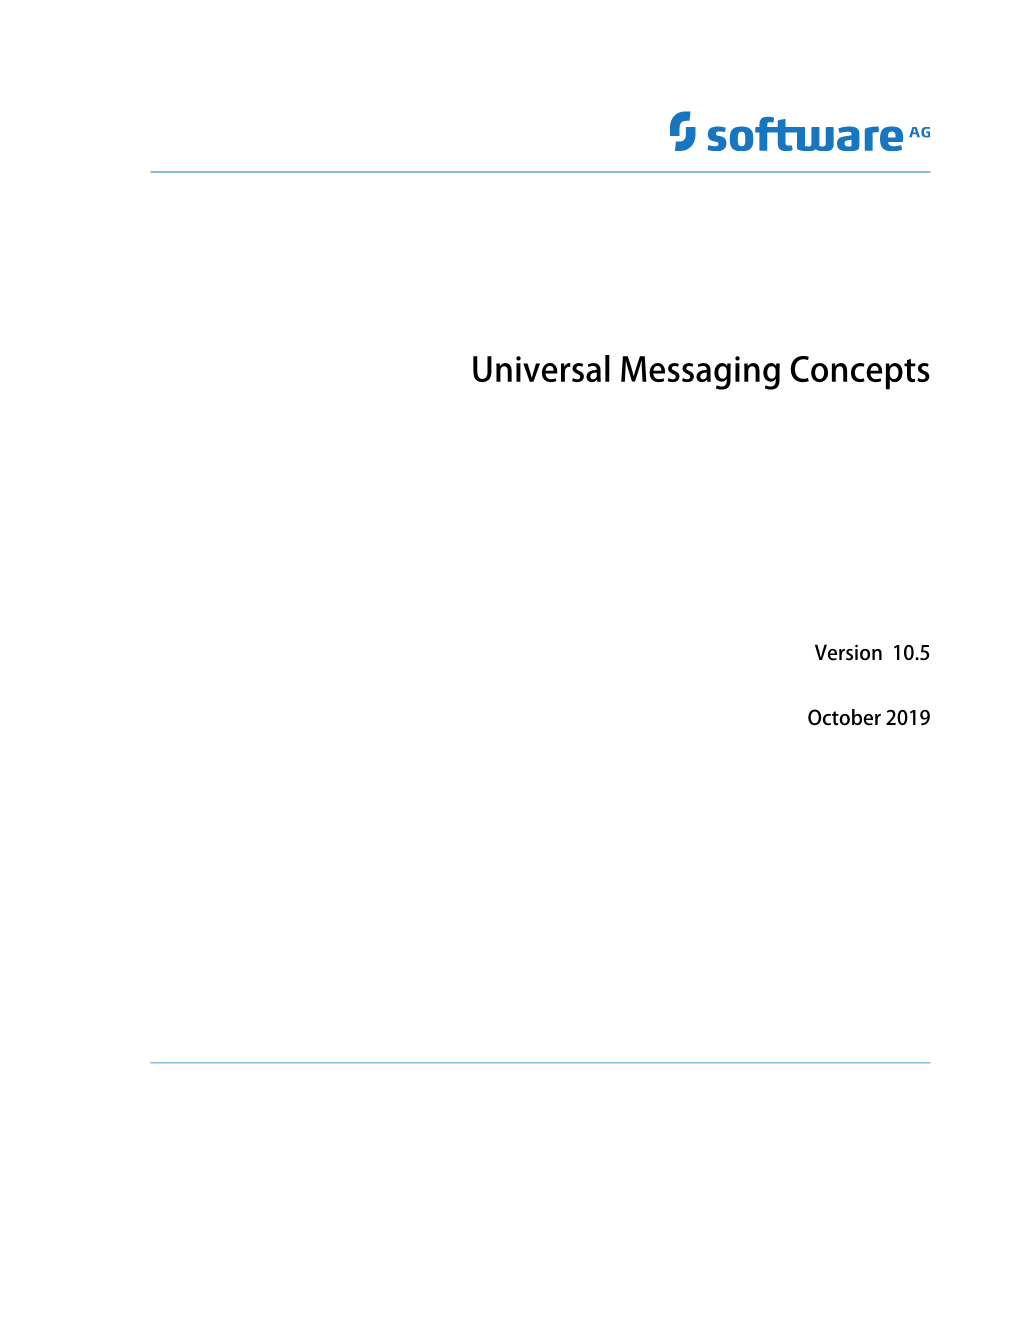 Universal Messaging Concepts